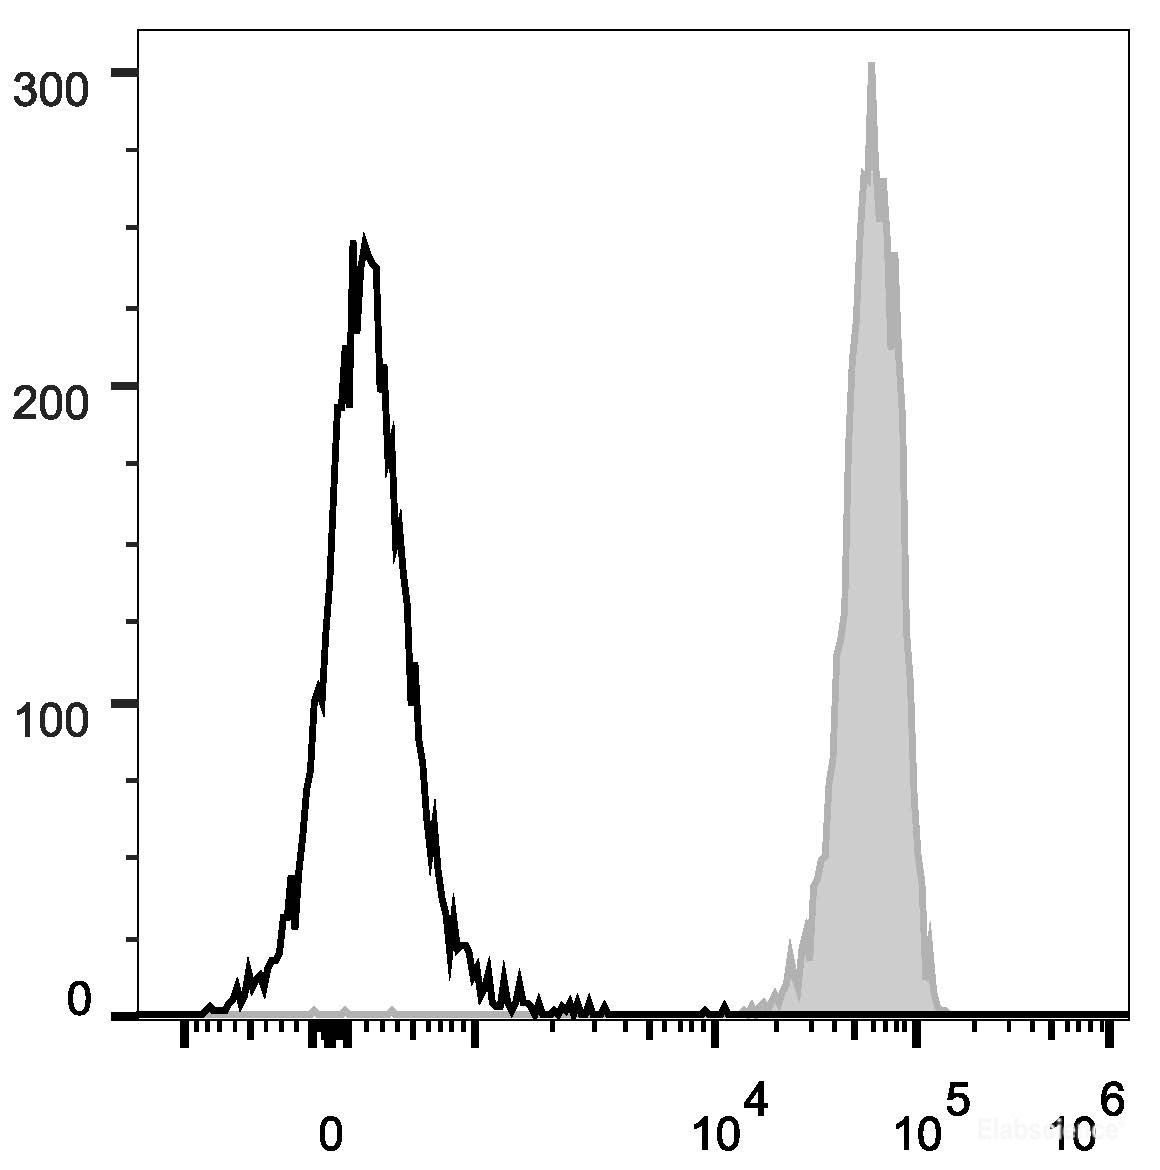 C57BL/6 murine splenocytes are stained with PerCP/Cyanine5.5 Anti-Mouse CD45 Antibody (filled gray histogram). Unstained splenocytes (empty black histogram) are used as control.